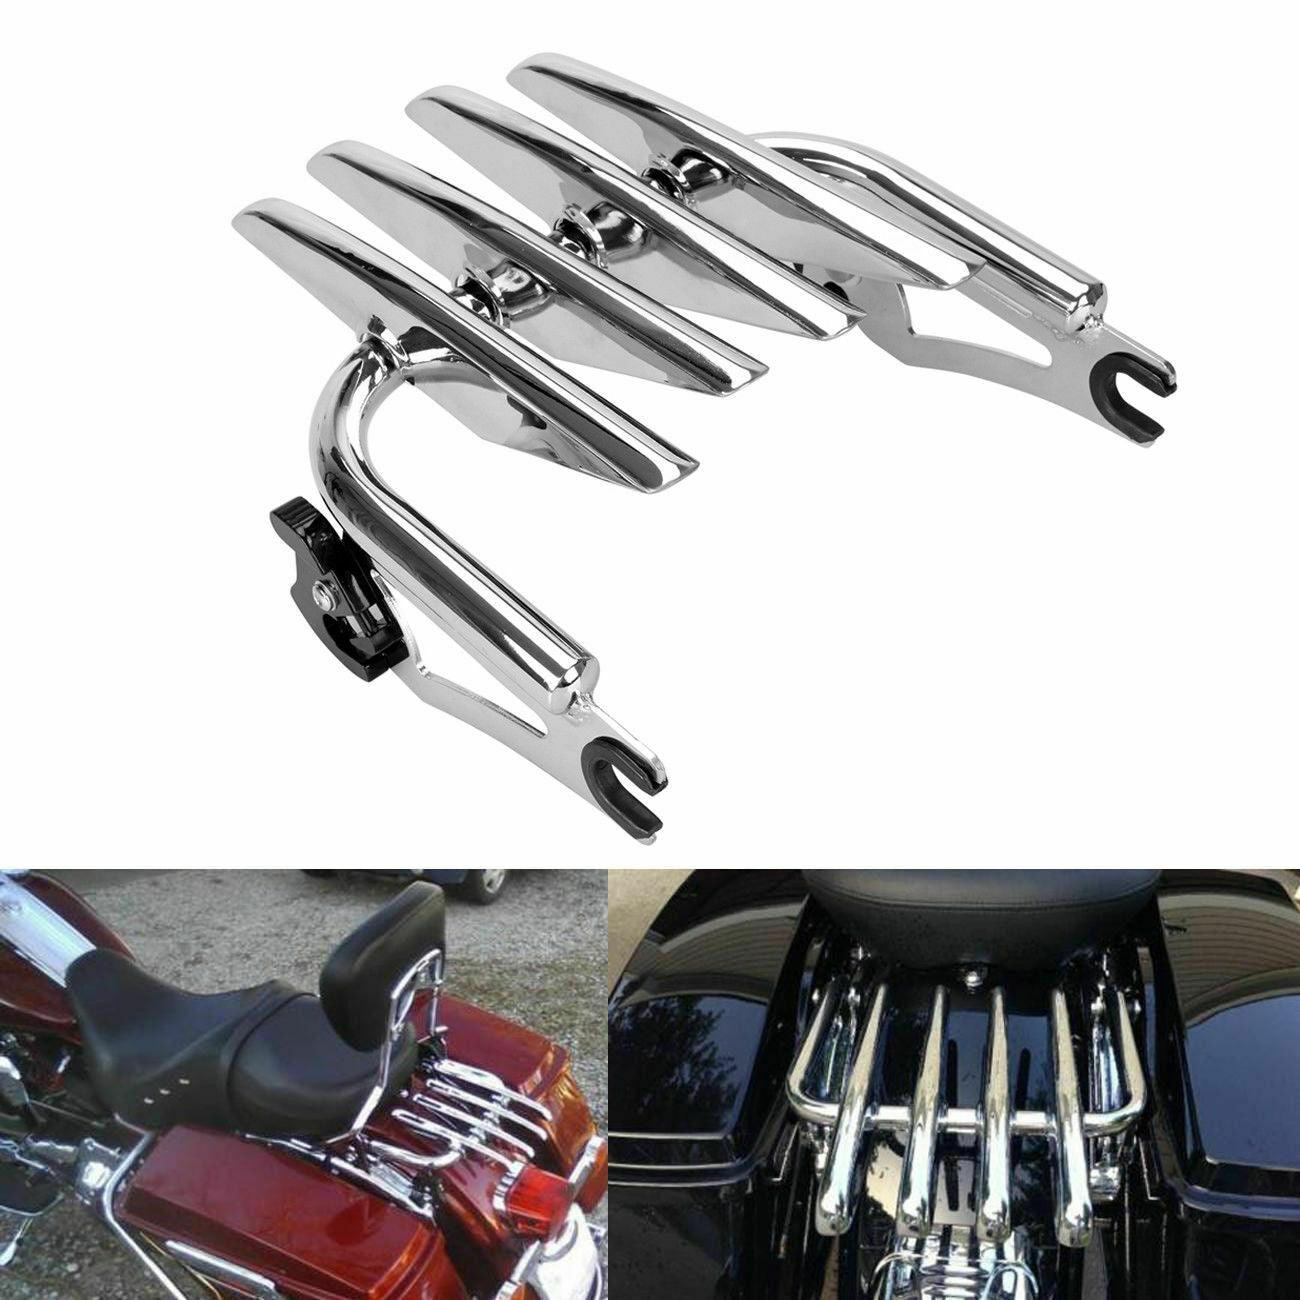 Chrome Stealth Luggage Rack Harley Touring Street Glide Road King 2009-2021 - Moto Life Products